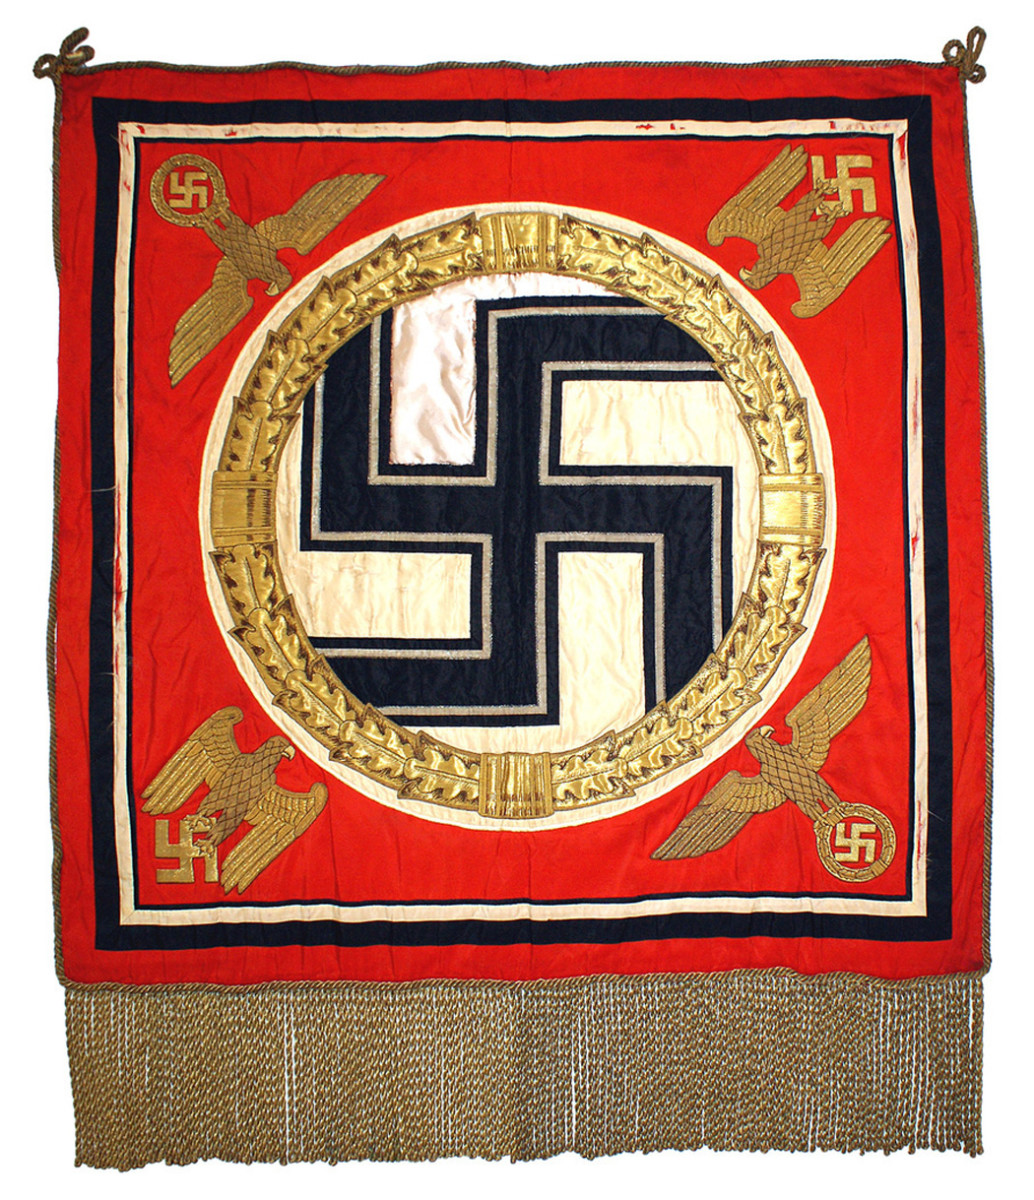 Third Reich Fuhrer Standarte, 39 inches by 38 inches, the rich red field featuring a design of a black silk static swastika within a high relief gold bullion and gold leaf wreath.